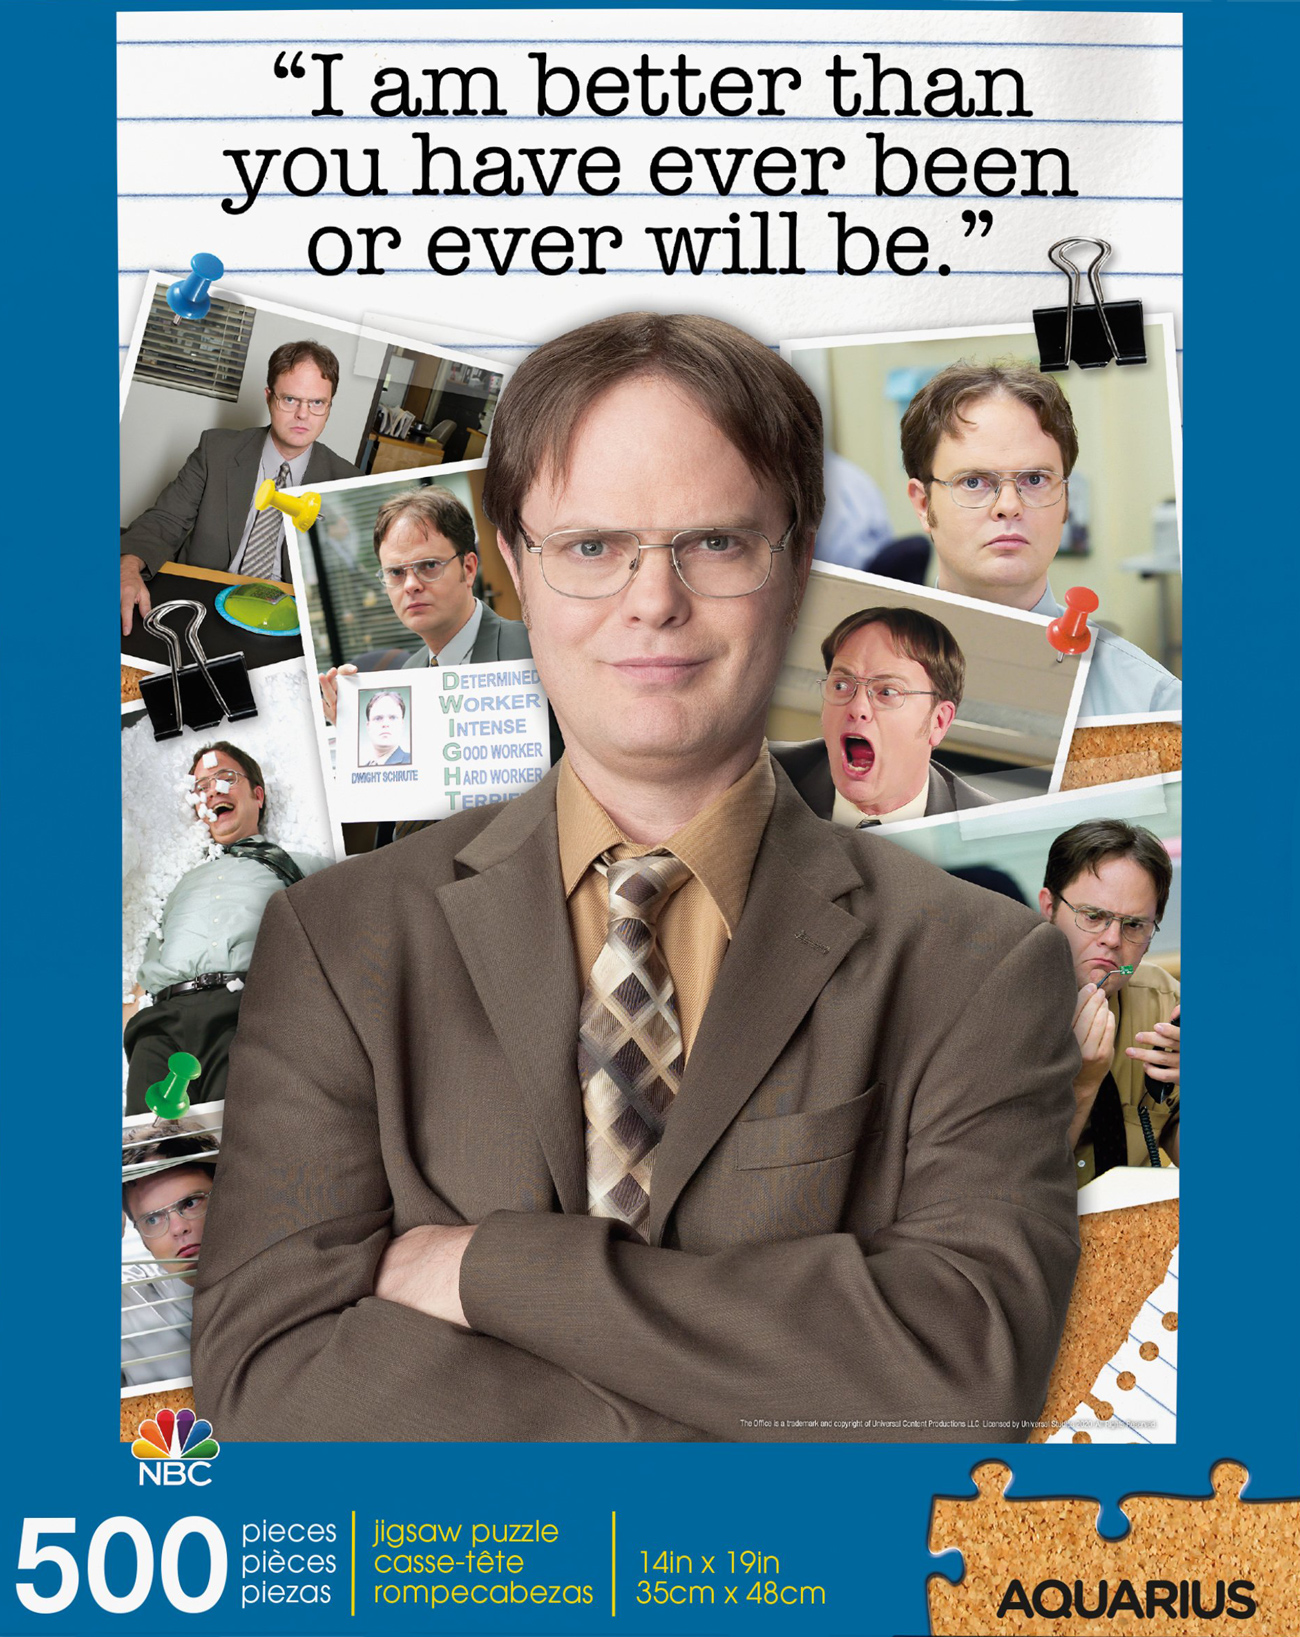 The Office Dwight Schrute Quote